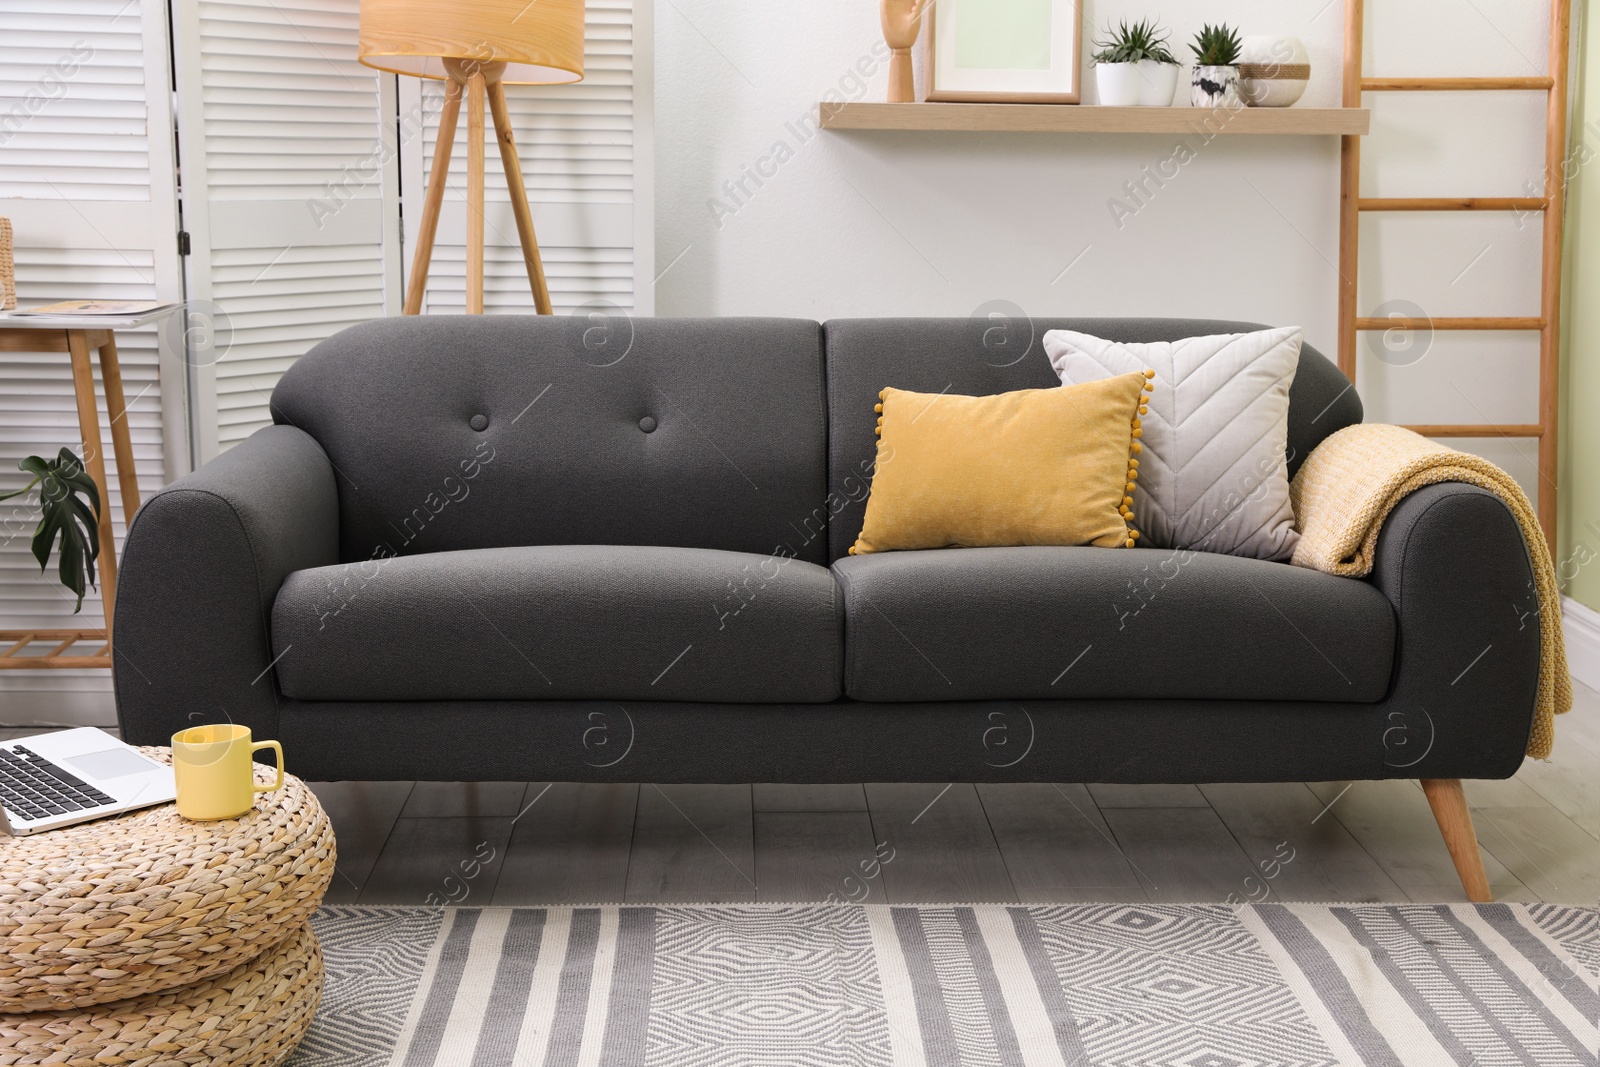 Photo of Stylish living room interior with comfortable sofa and lamp